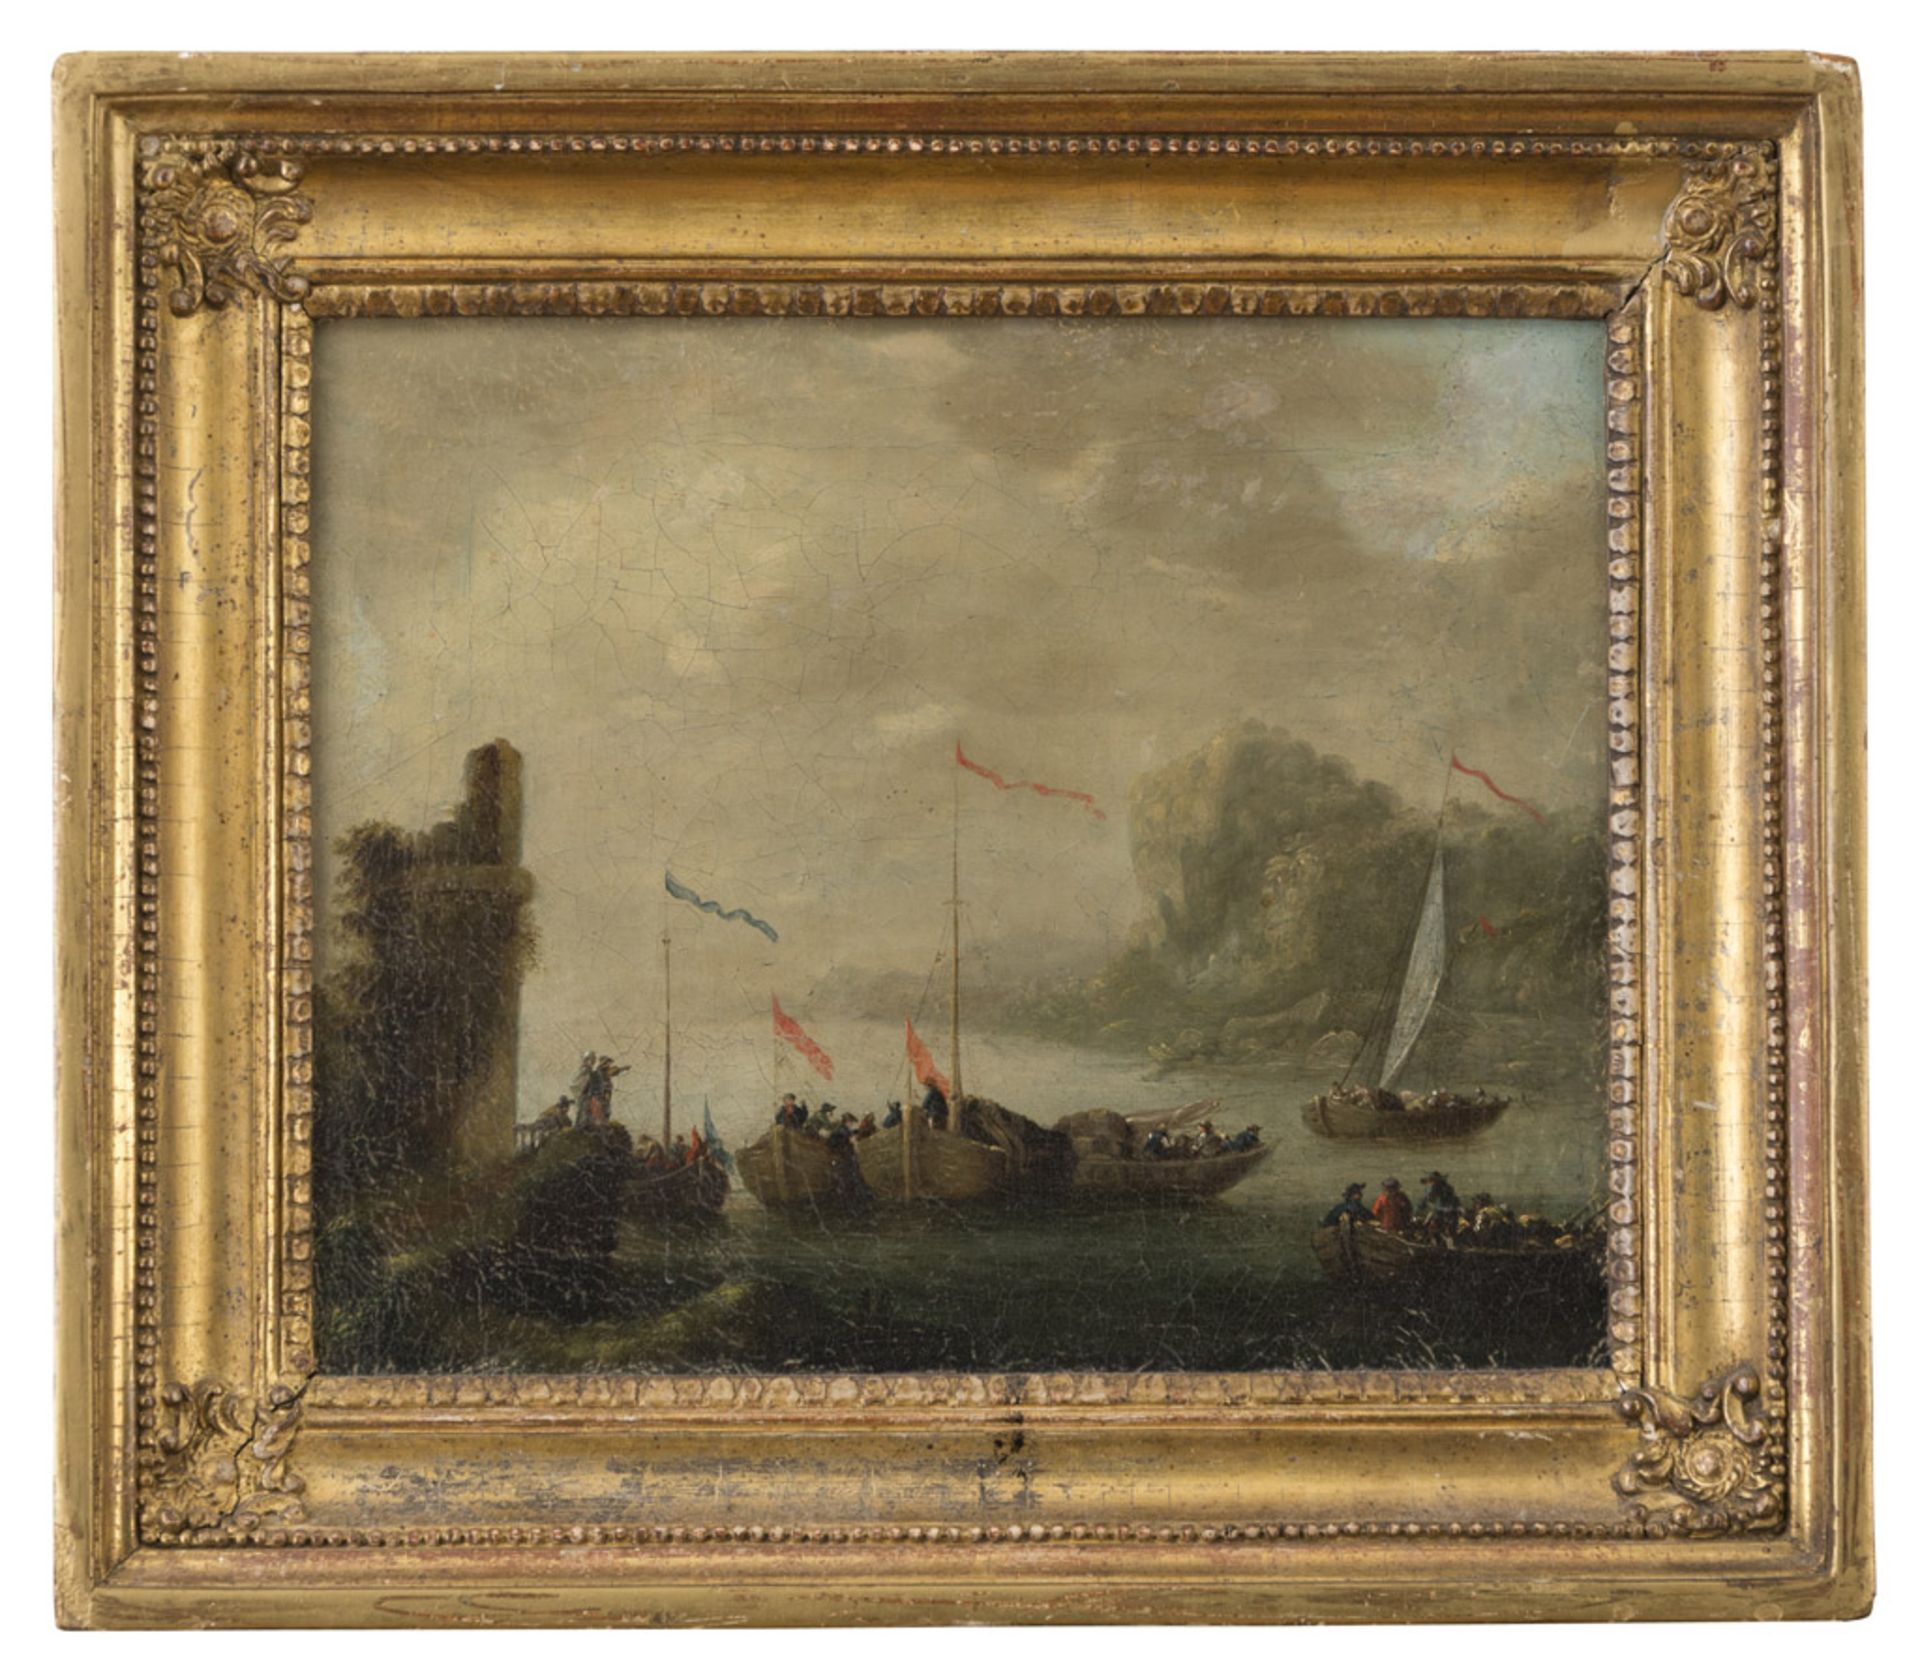 DUTCH PAINTER, 18TH CENTURY COASTLINE VIEW WITH BOATS Oil on canvas, cm. 28,5 x 33 CONDITIONS OF THE